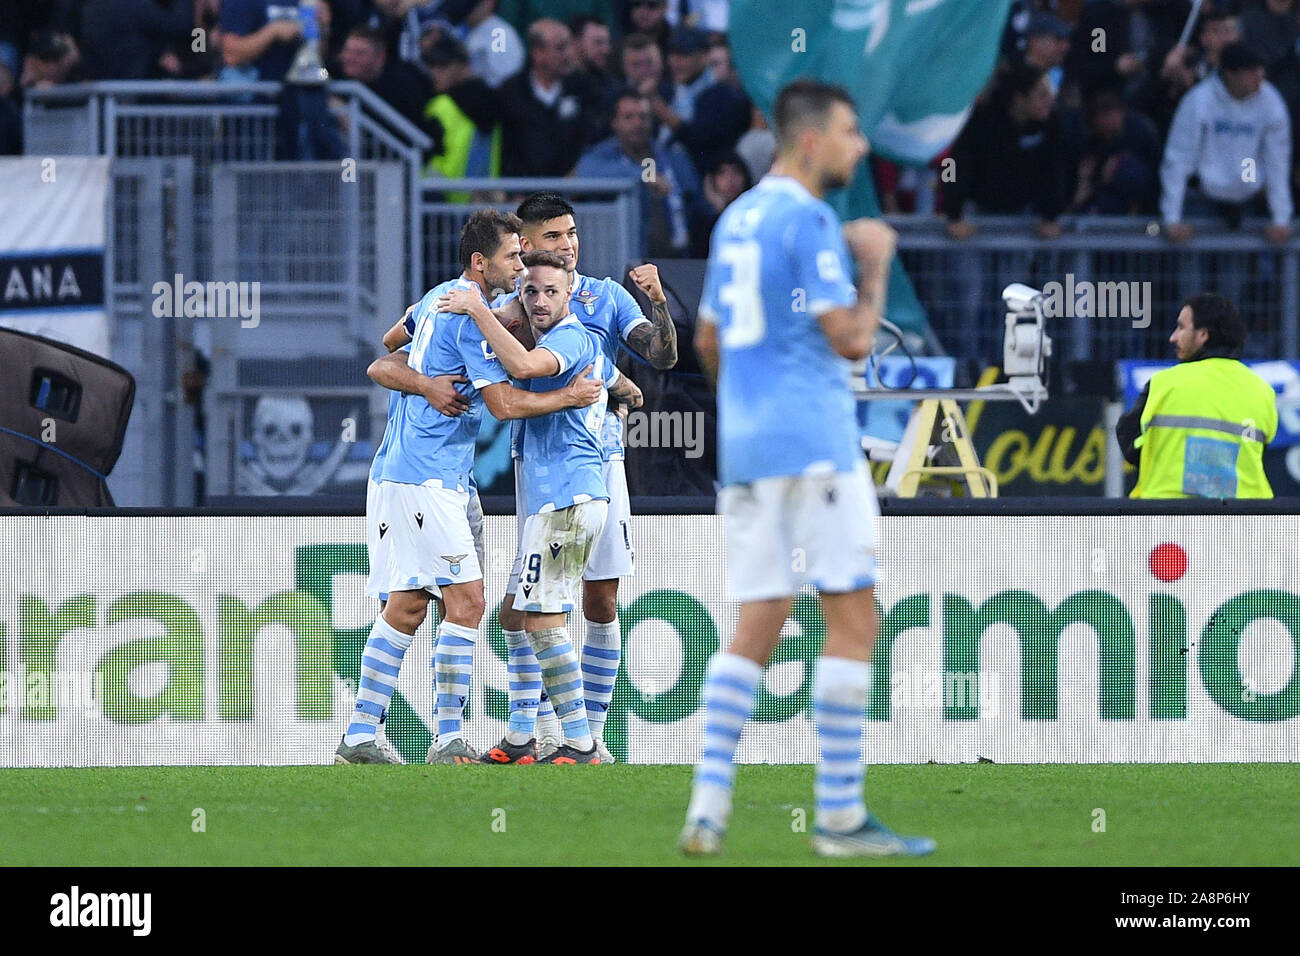 Rome, Italy. 10th Nov, 2019. Ciro Immobile of SS Lazio celebrates scoring third goal during the Serie A match between Lazio and Lecce at Stadio Olimpico, Rome, Italy on 10 November 2019. Photo by Giuseppe Maffia. Credit: UK Sports Pics Ltd/Alamy Live News Stock Photo